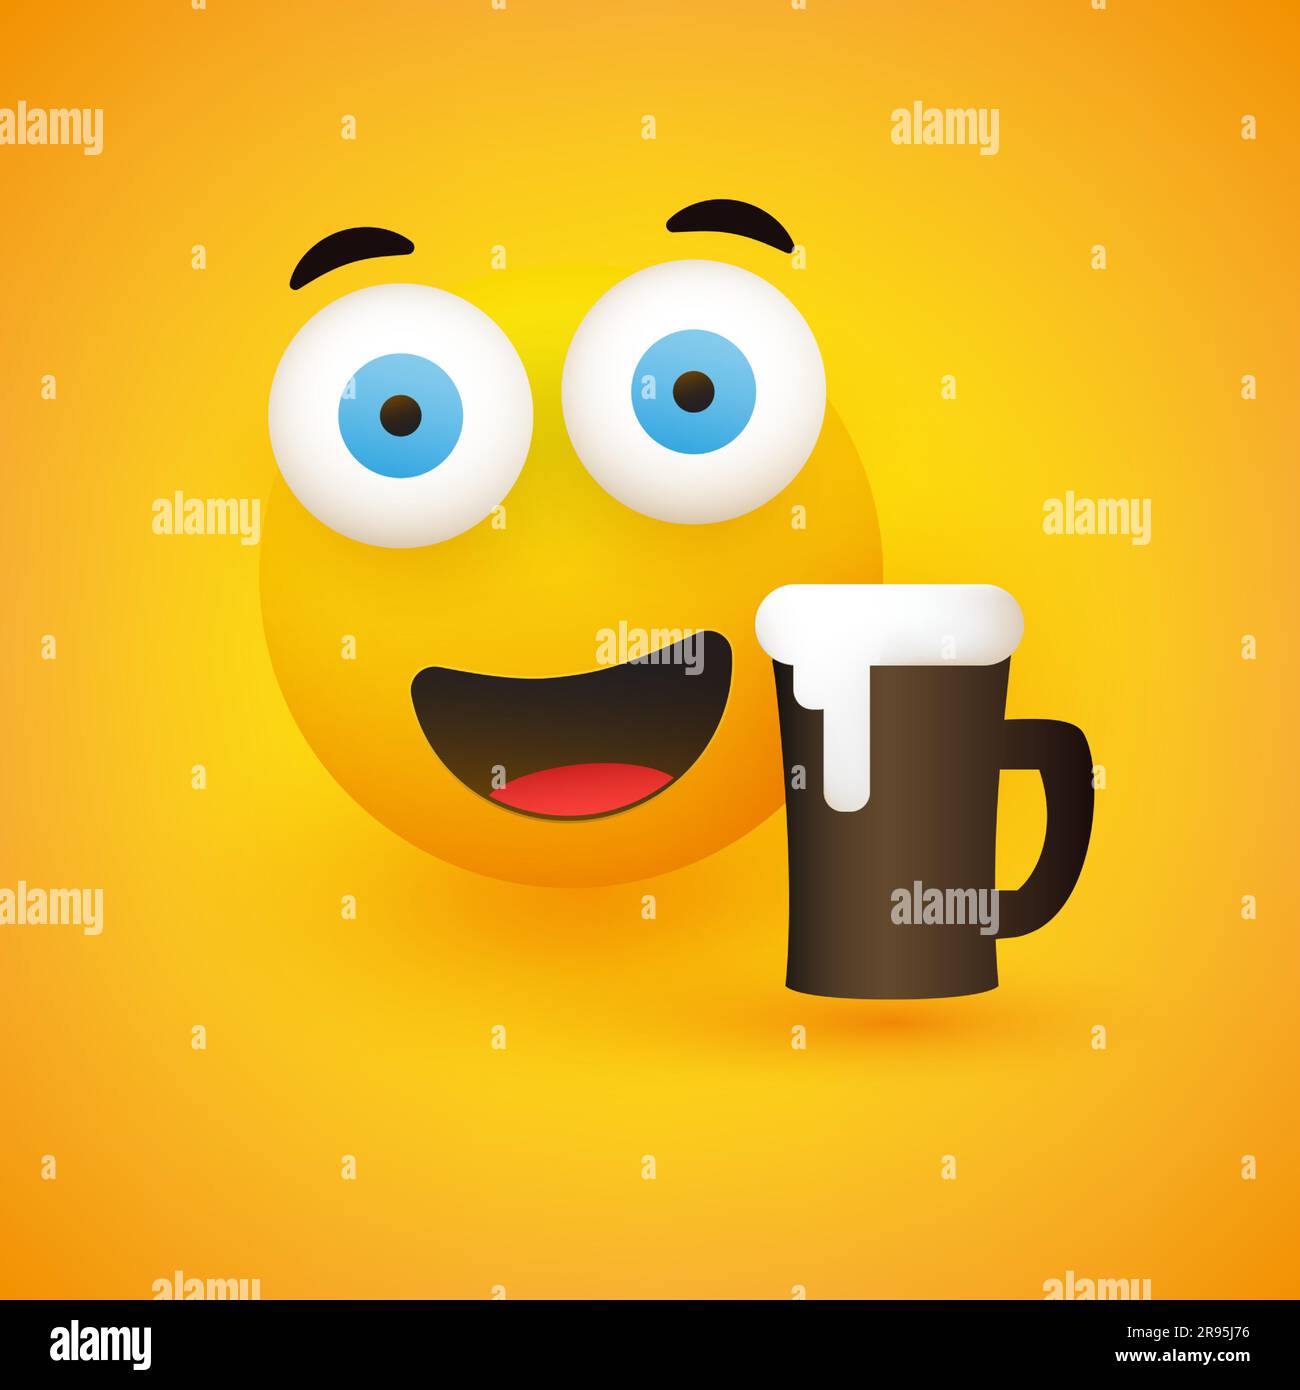 https://c8.alamy.com/comp/2R95J76/smiling-emoji-simple-happy-emoticon-with-pop-out-eyes-and-a-glass-of-beer-on-yellow-background-vector-design-2R95J76.jpg